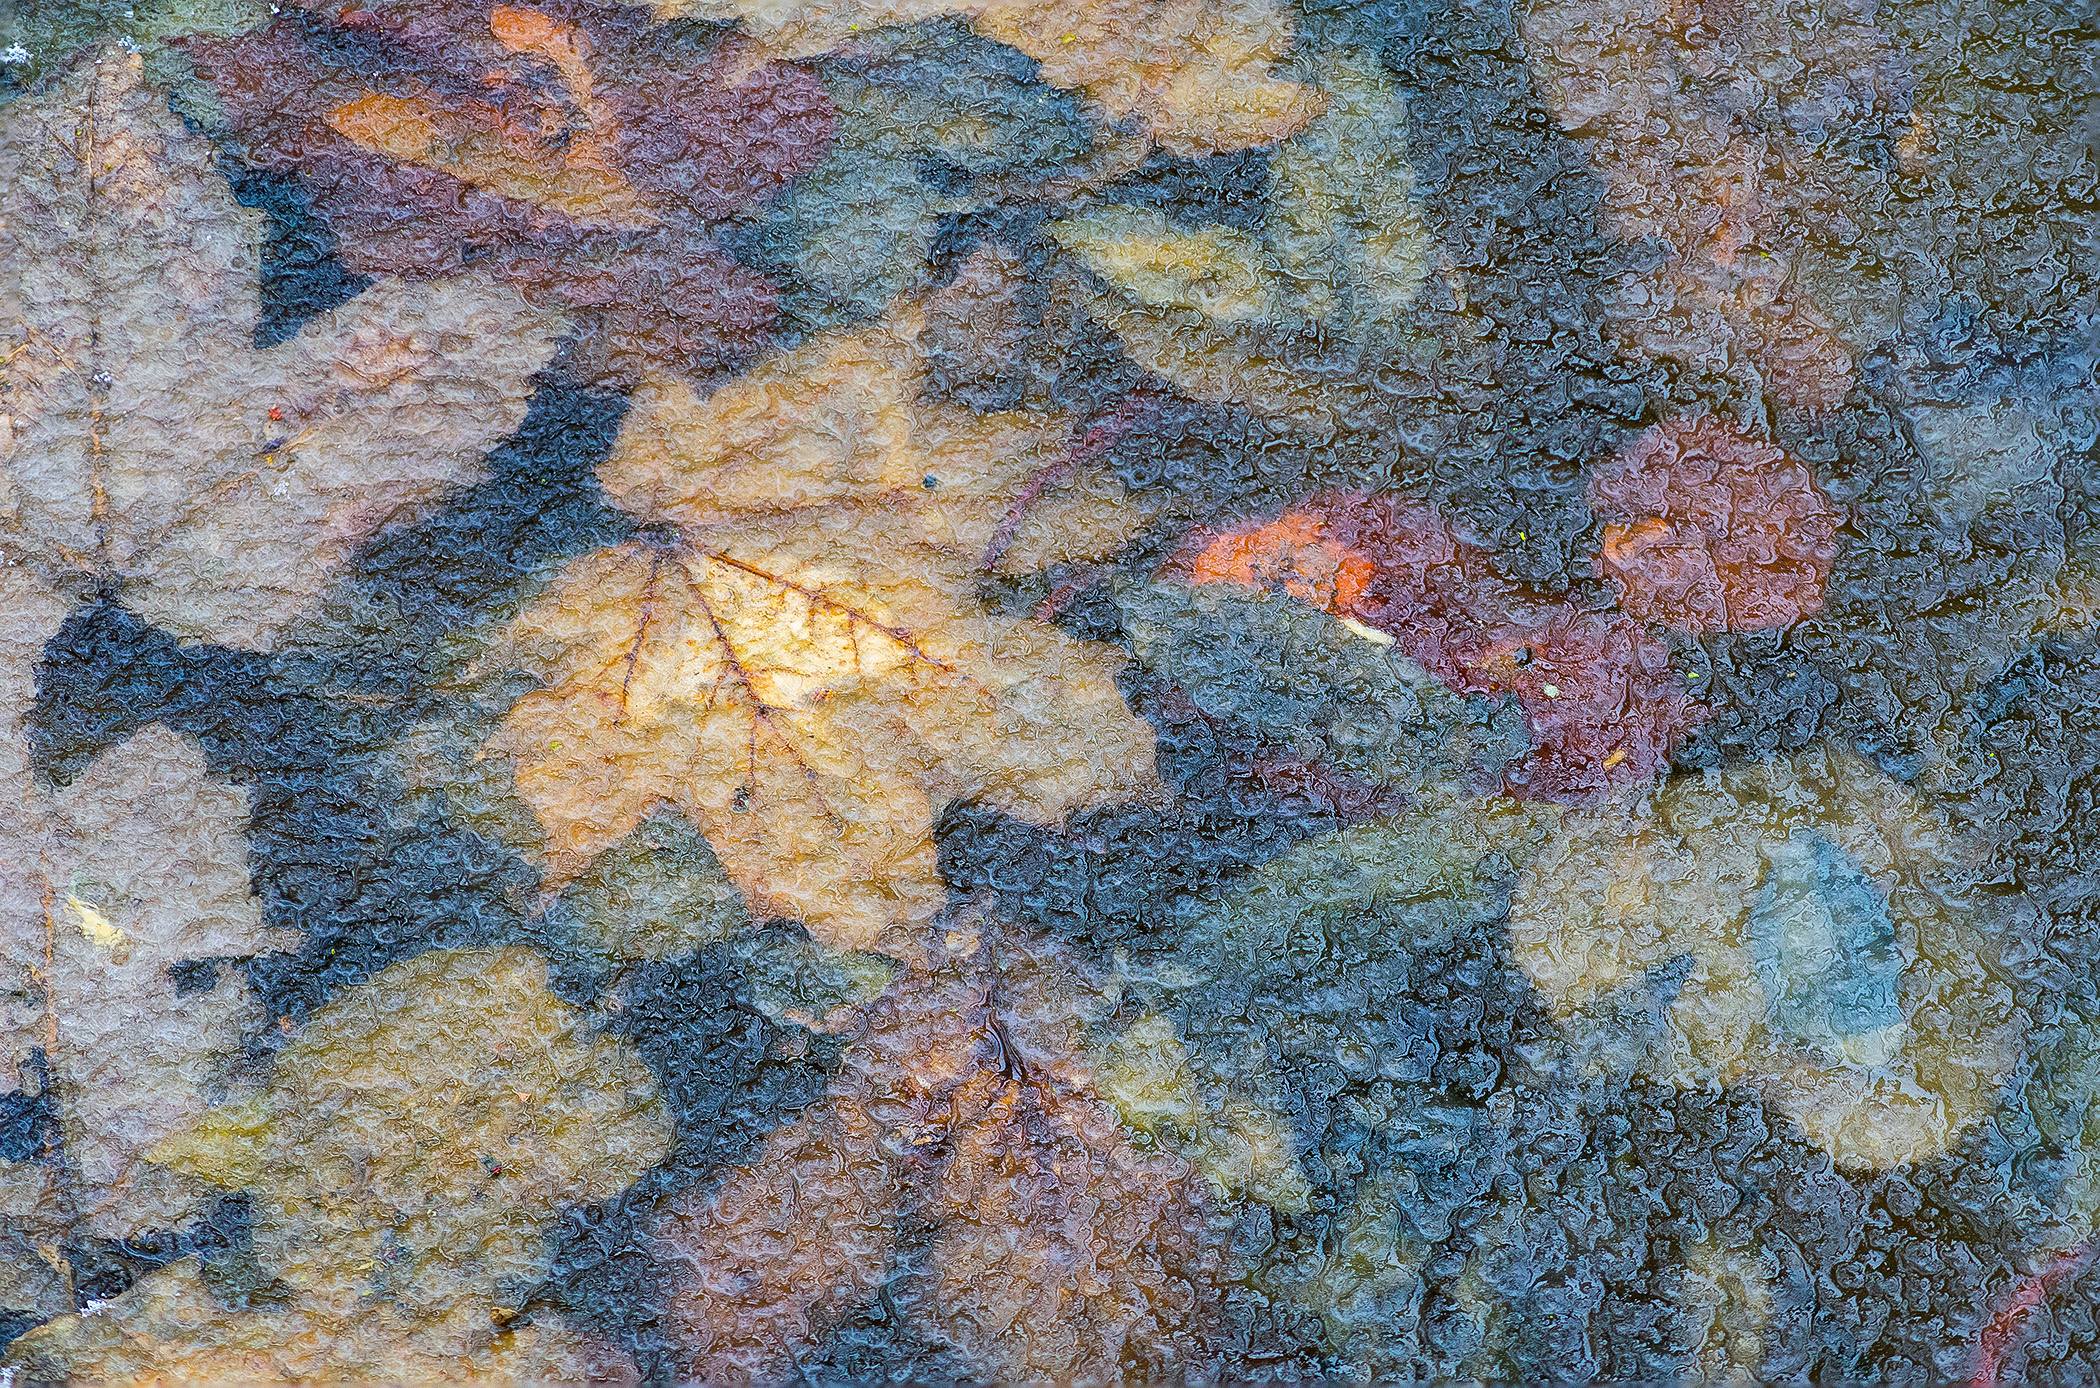 Rotten Leaves under Ice